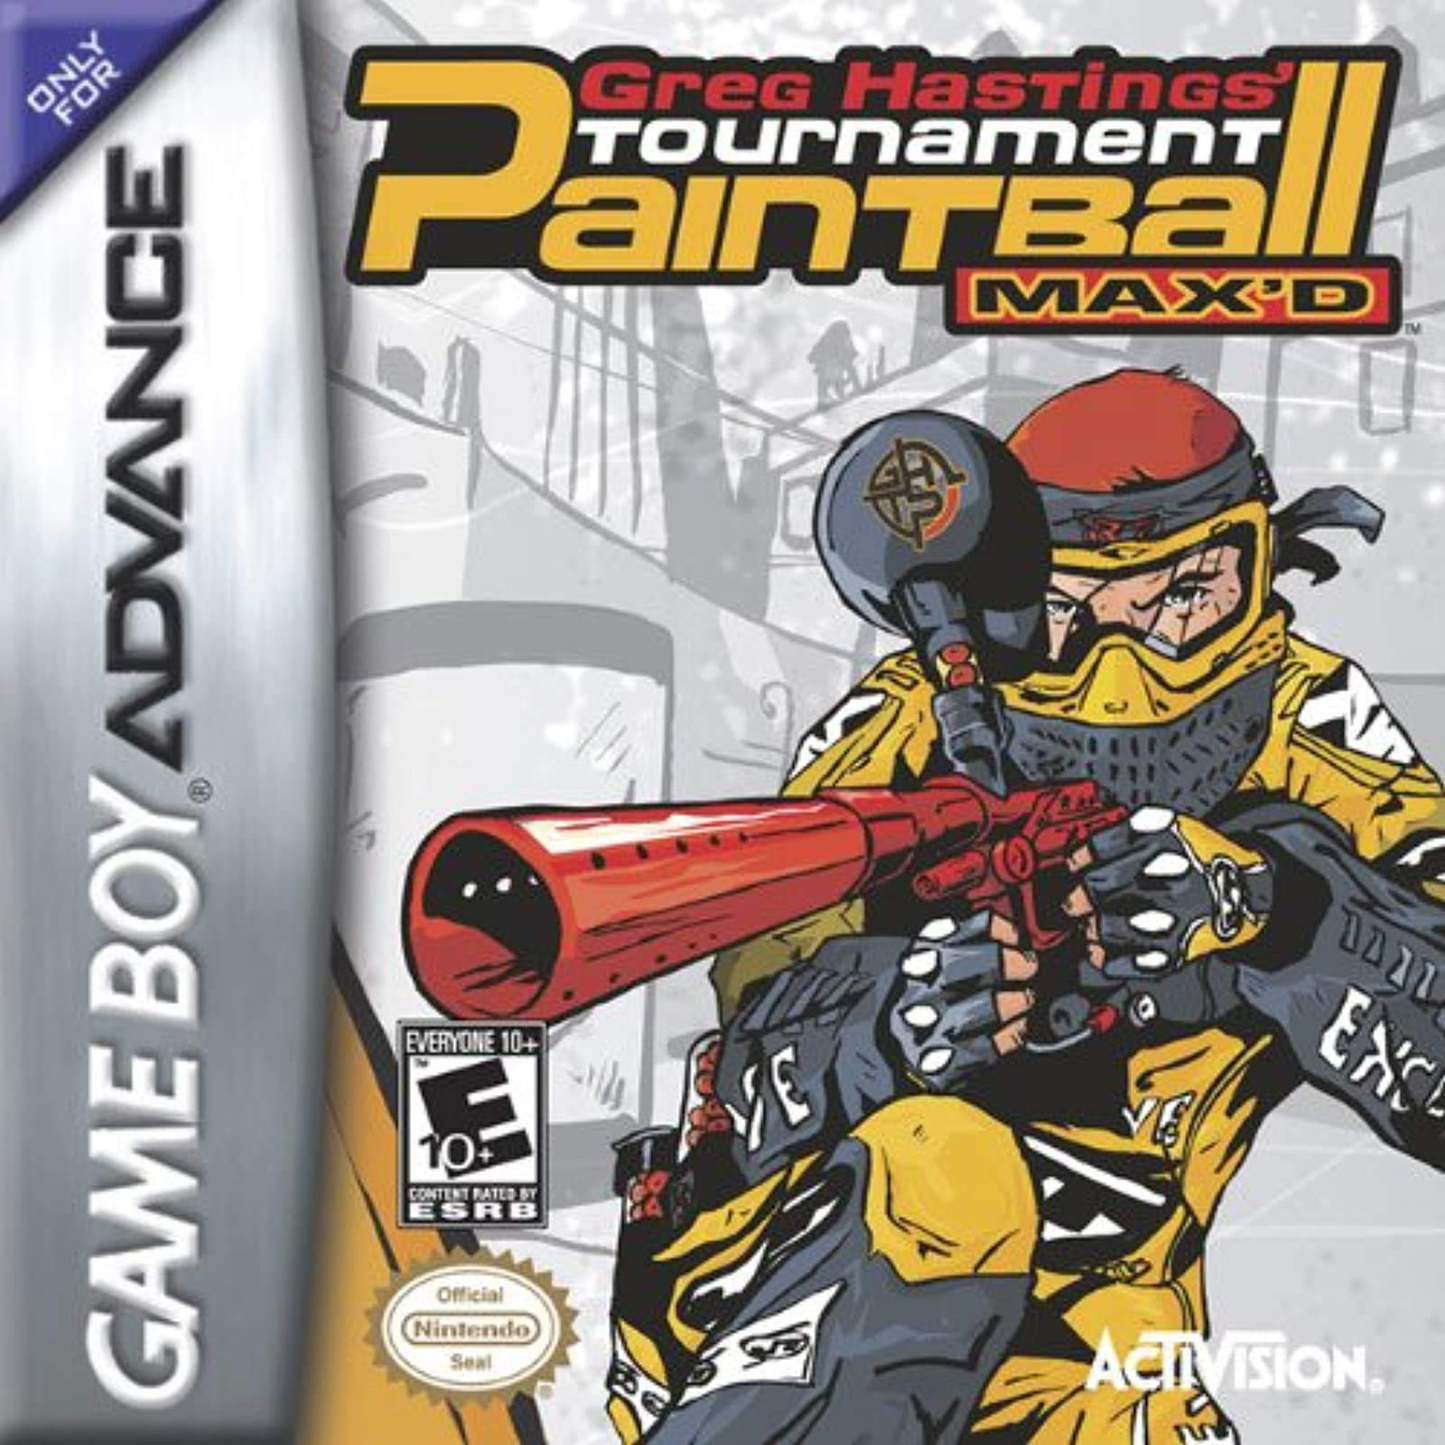 Greg Hastings Tournament Paintball Maxed - Game Boy Advance